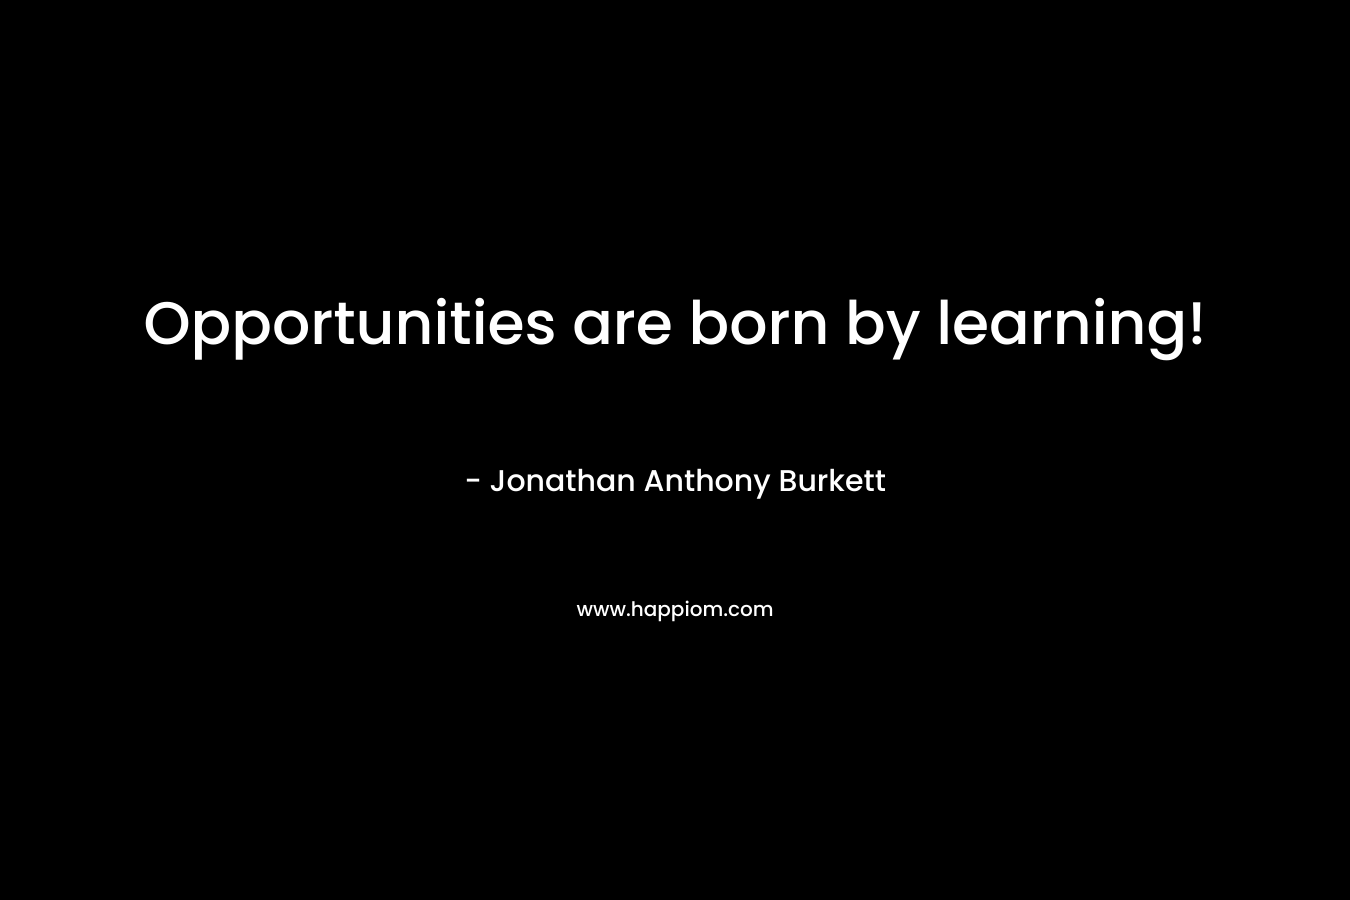 Opportunities are born by learning!